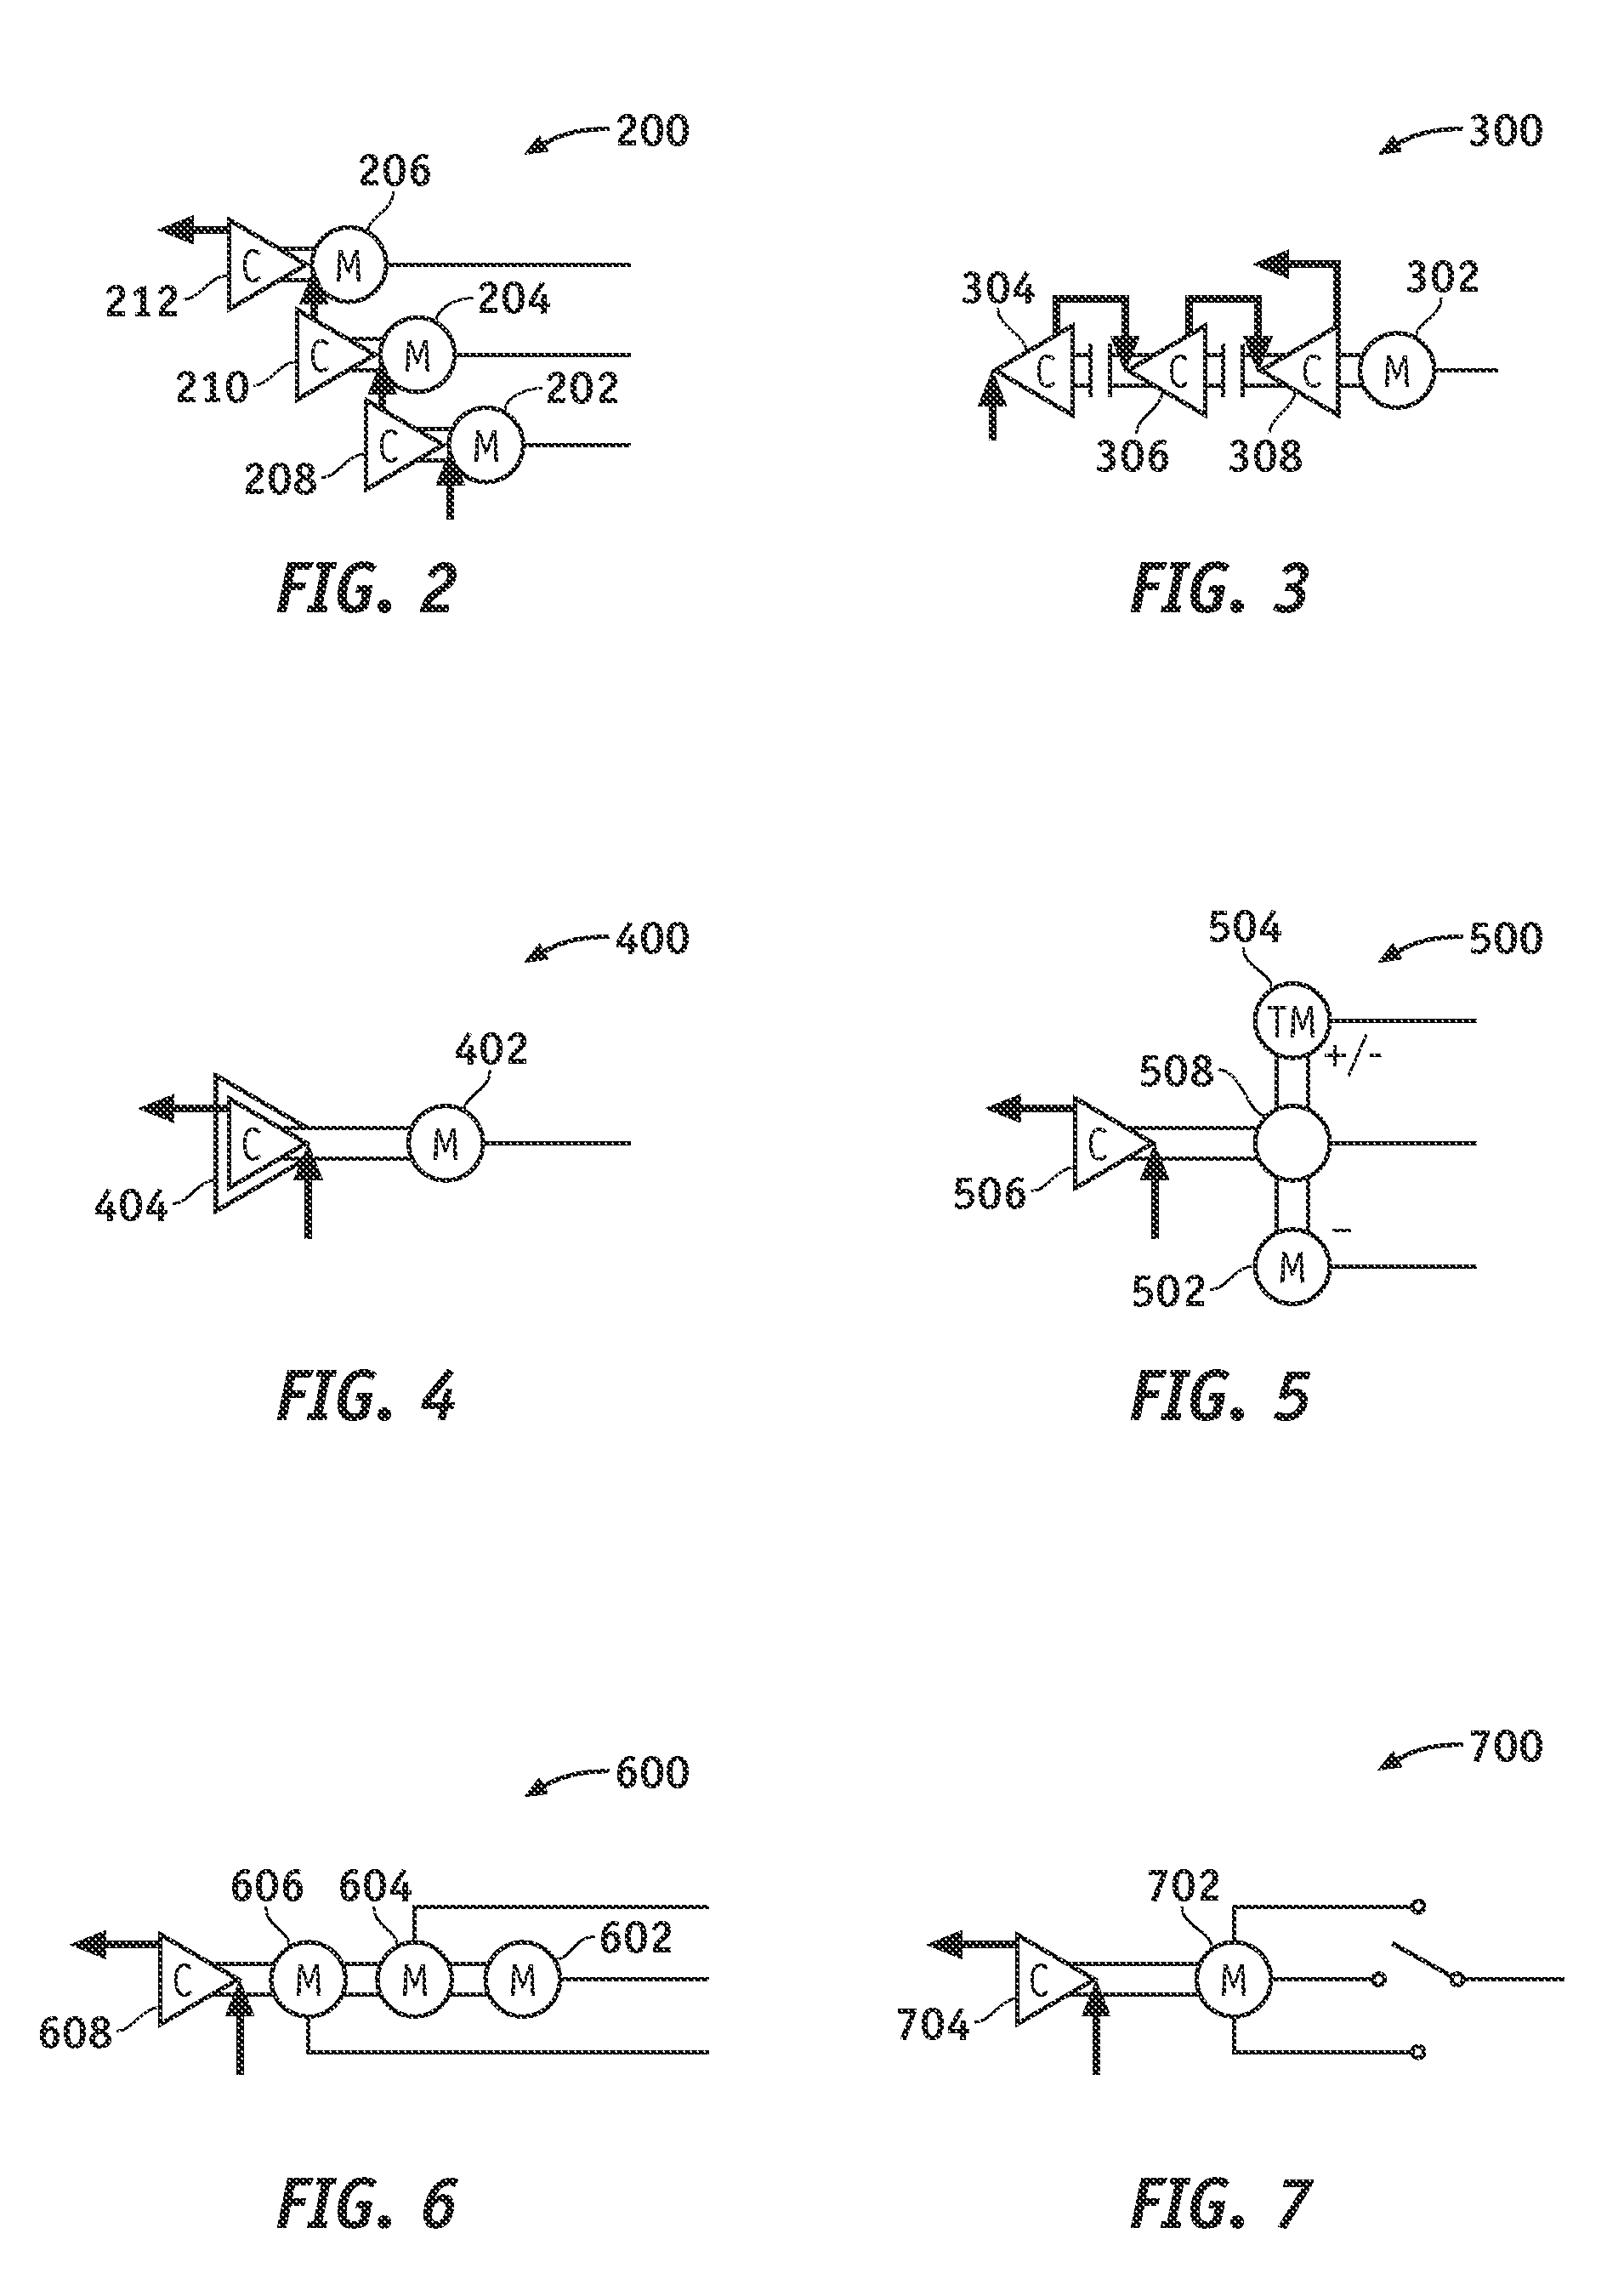 Electrical systems architecture for an aircraft, and related operating methods